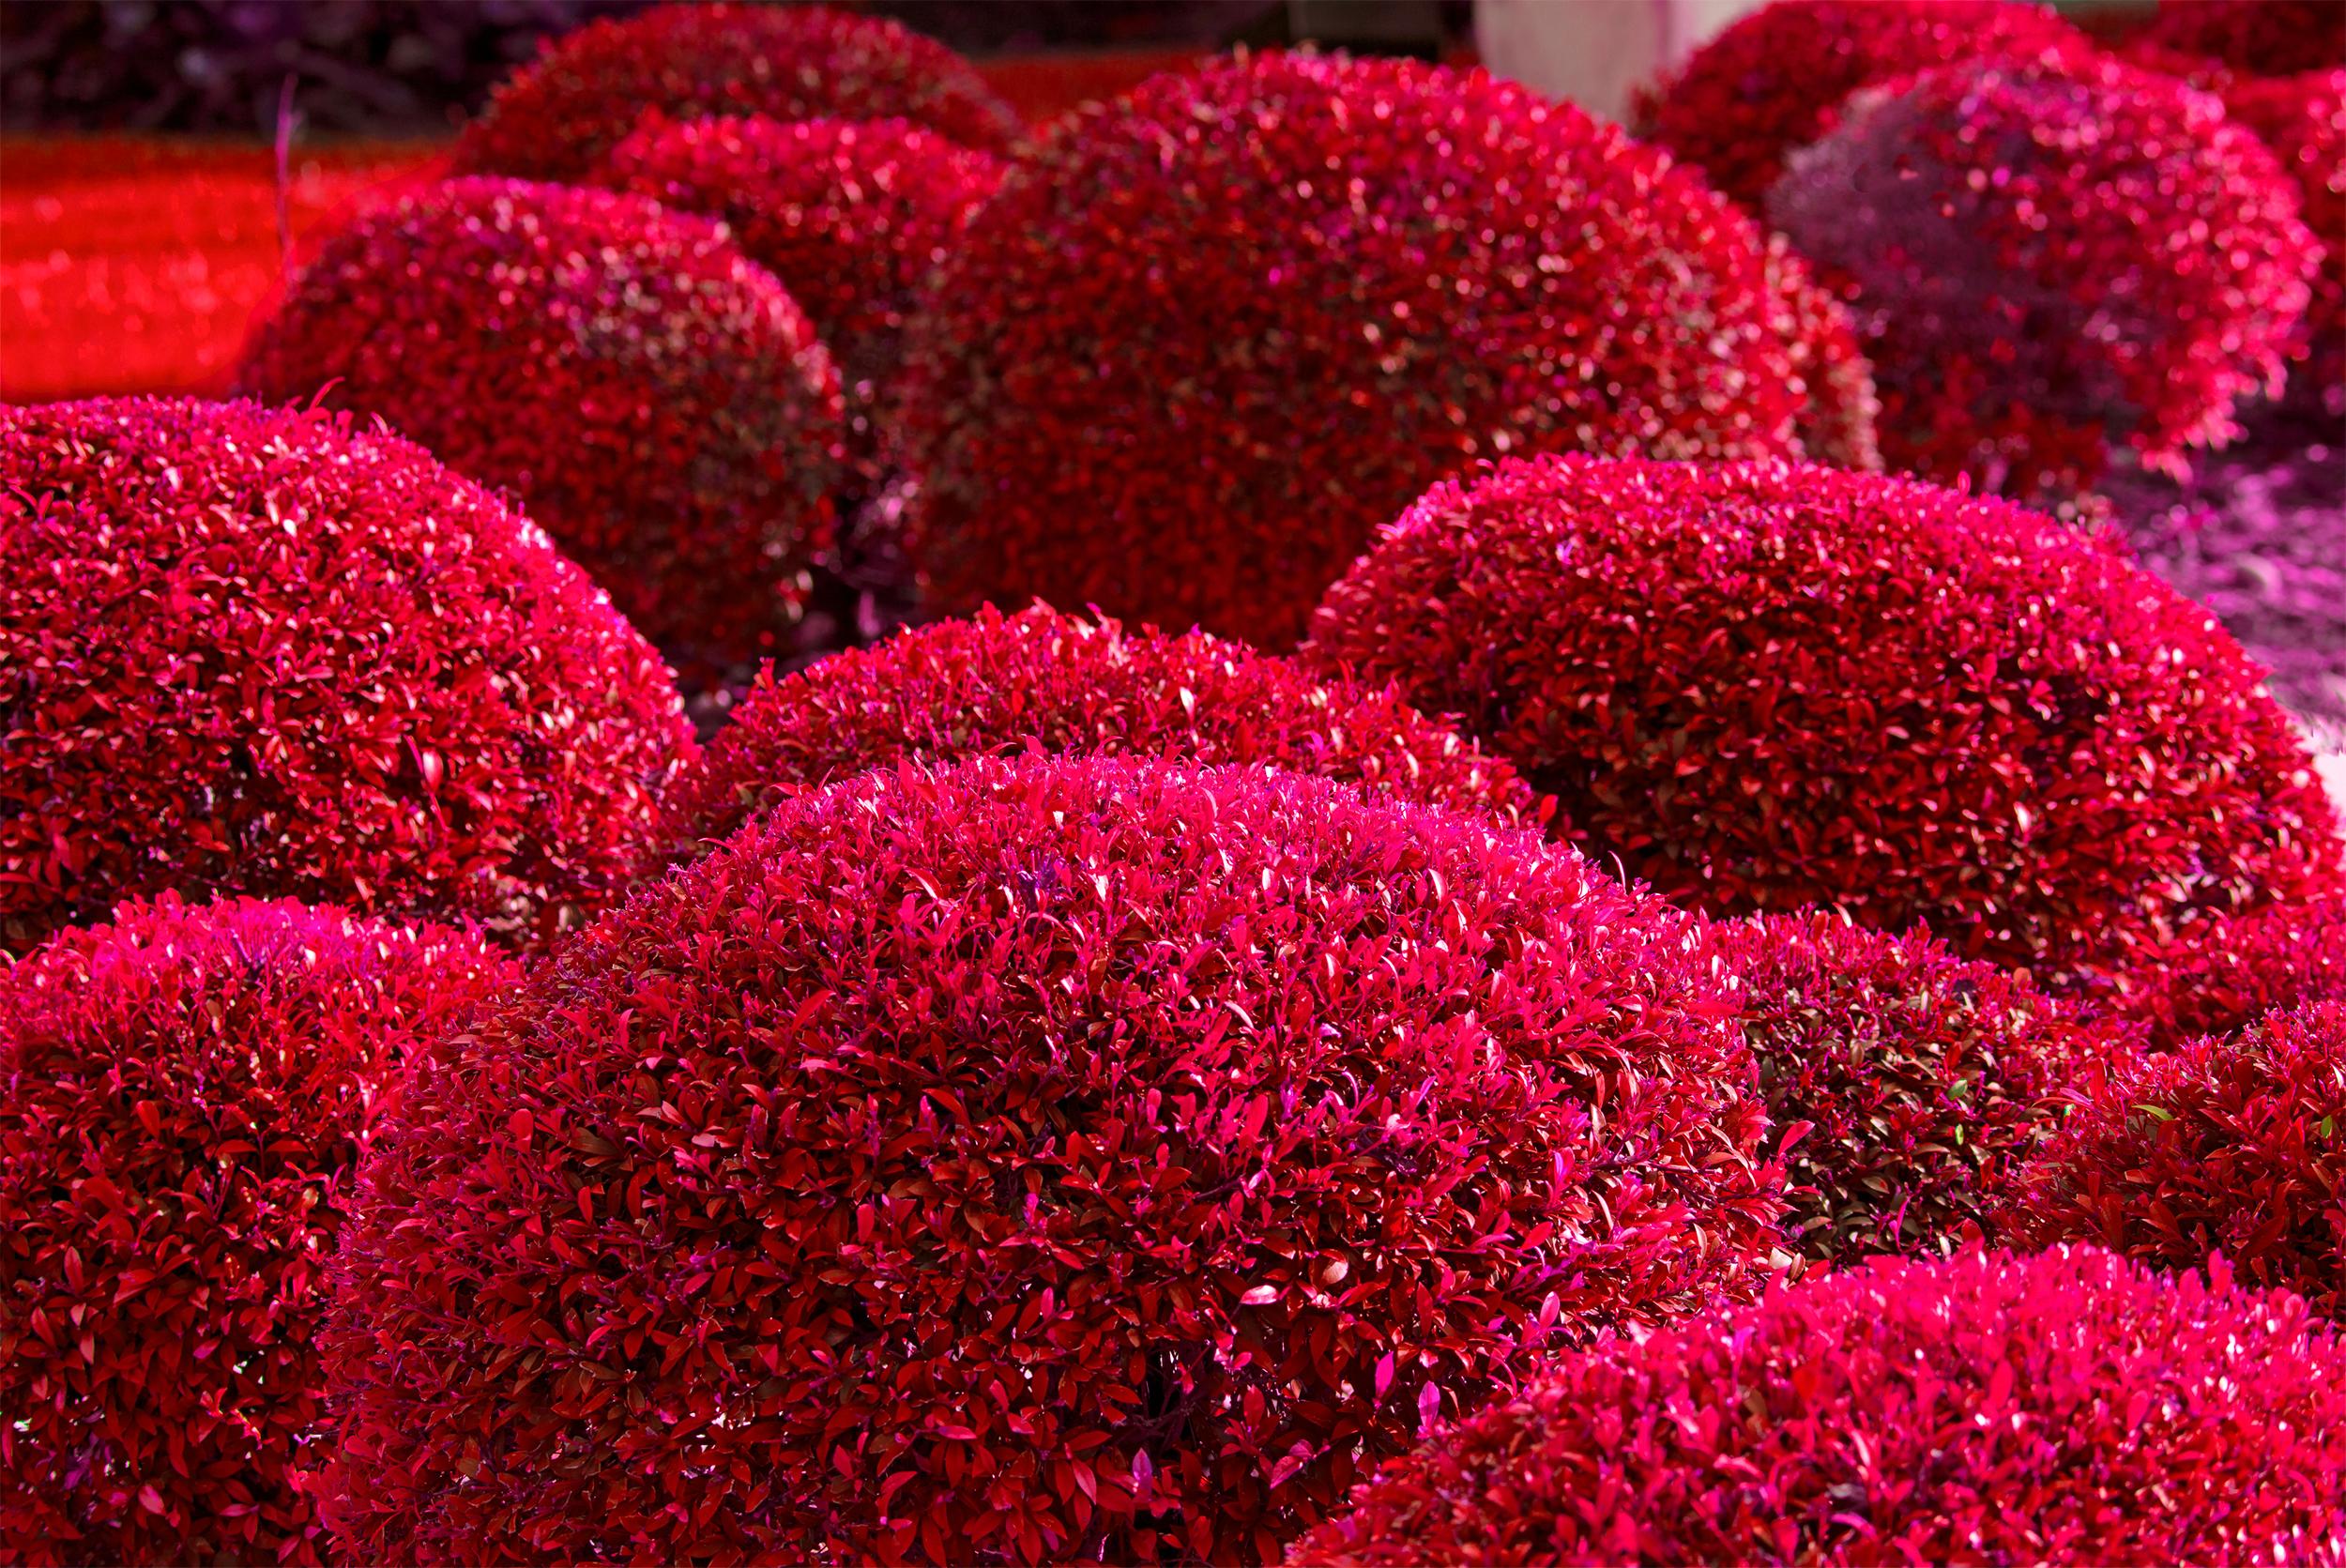 Robert Funk Landscape Photograph - Hedge Fun - Bal Harbor  - Miami Beach, Landscaping in Red and Violet